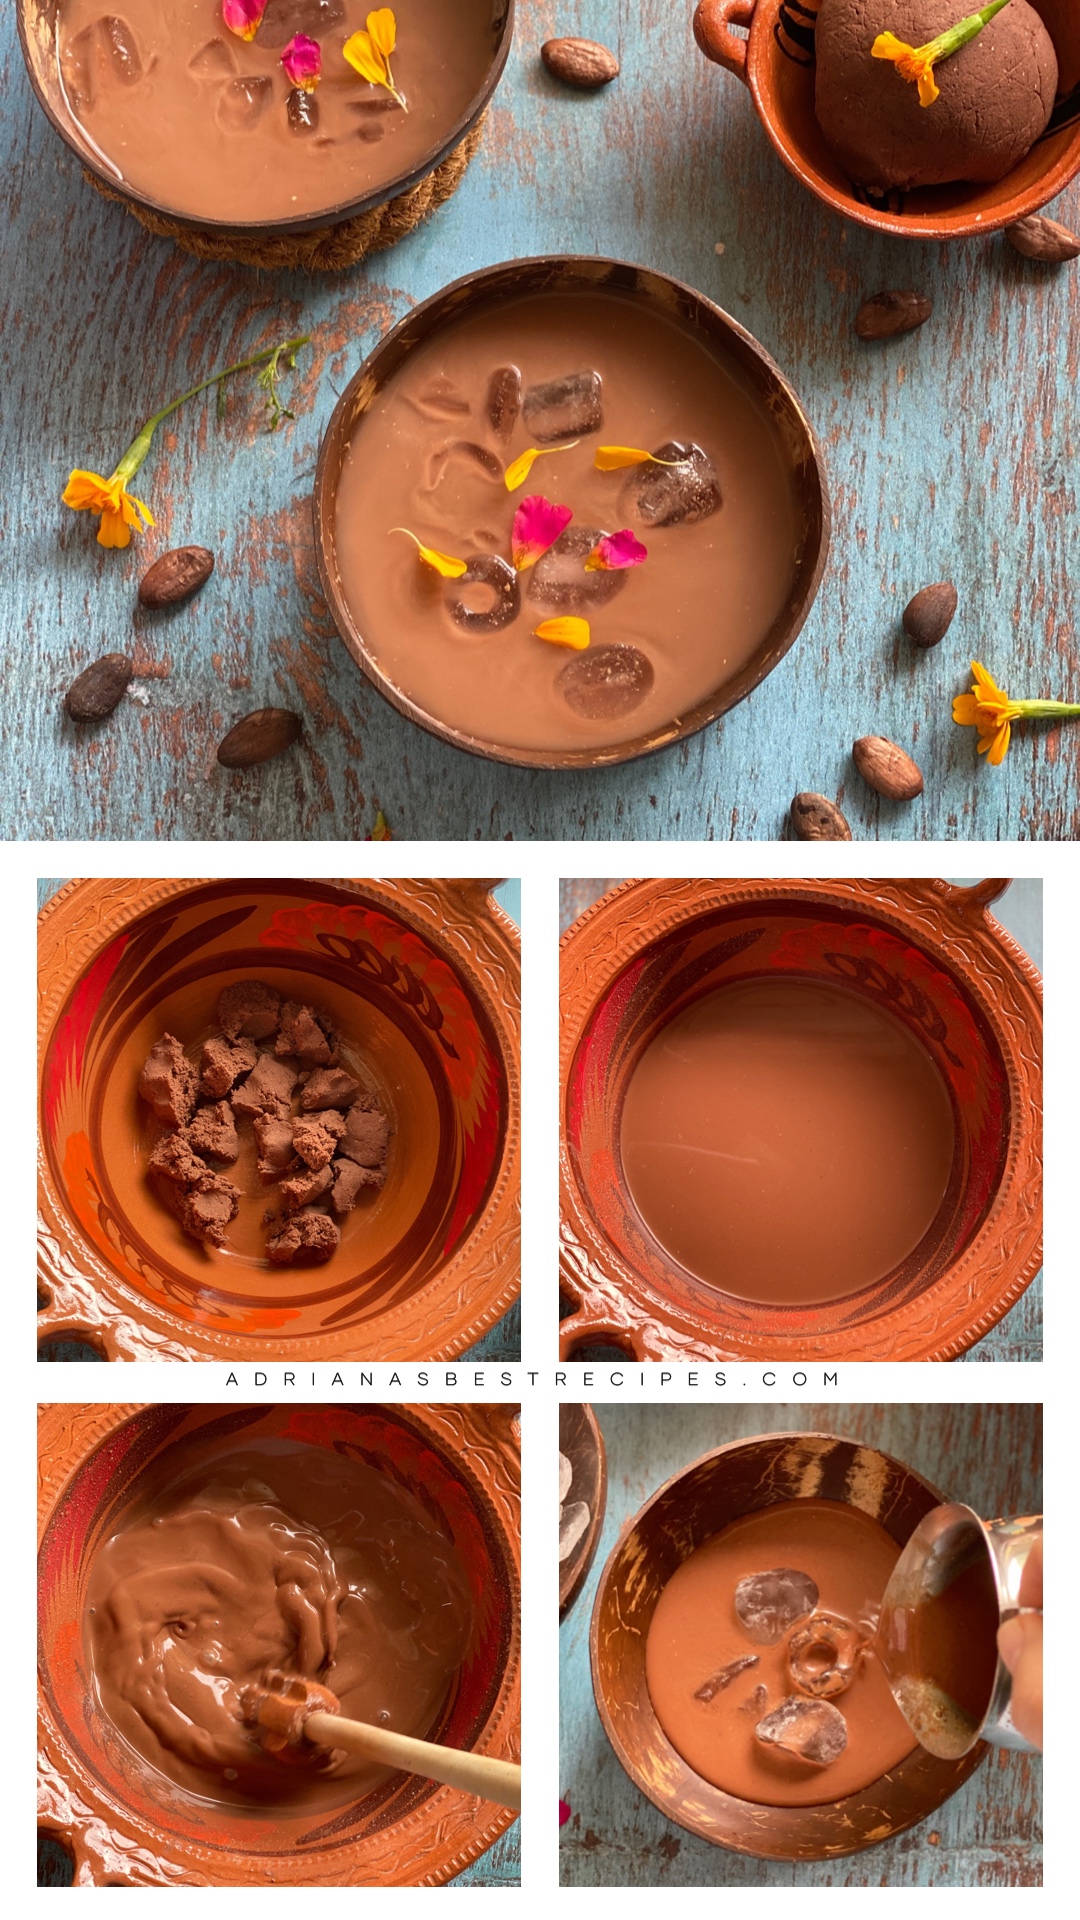 a collage showing how to make pozol using a clay pot